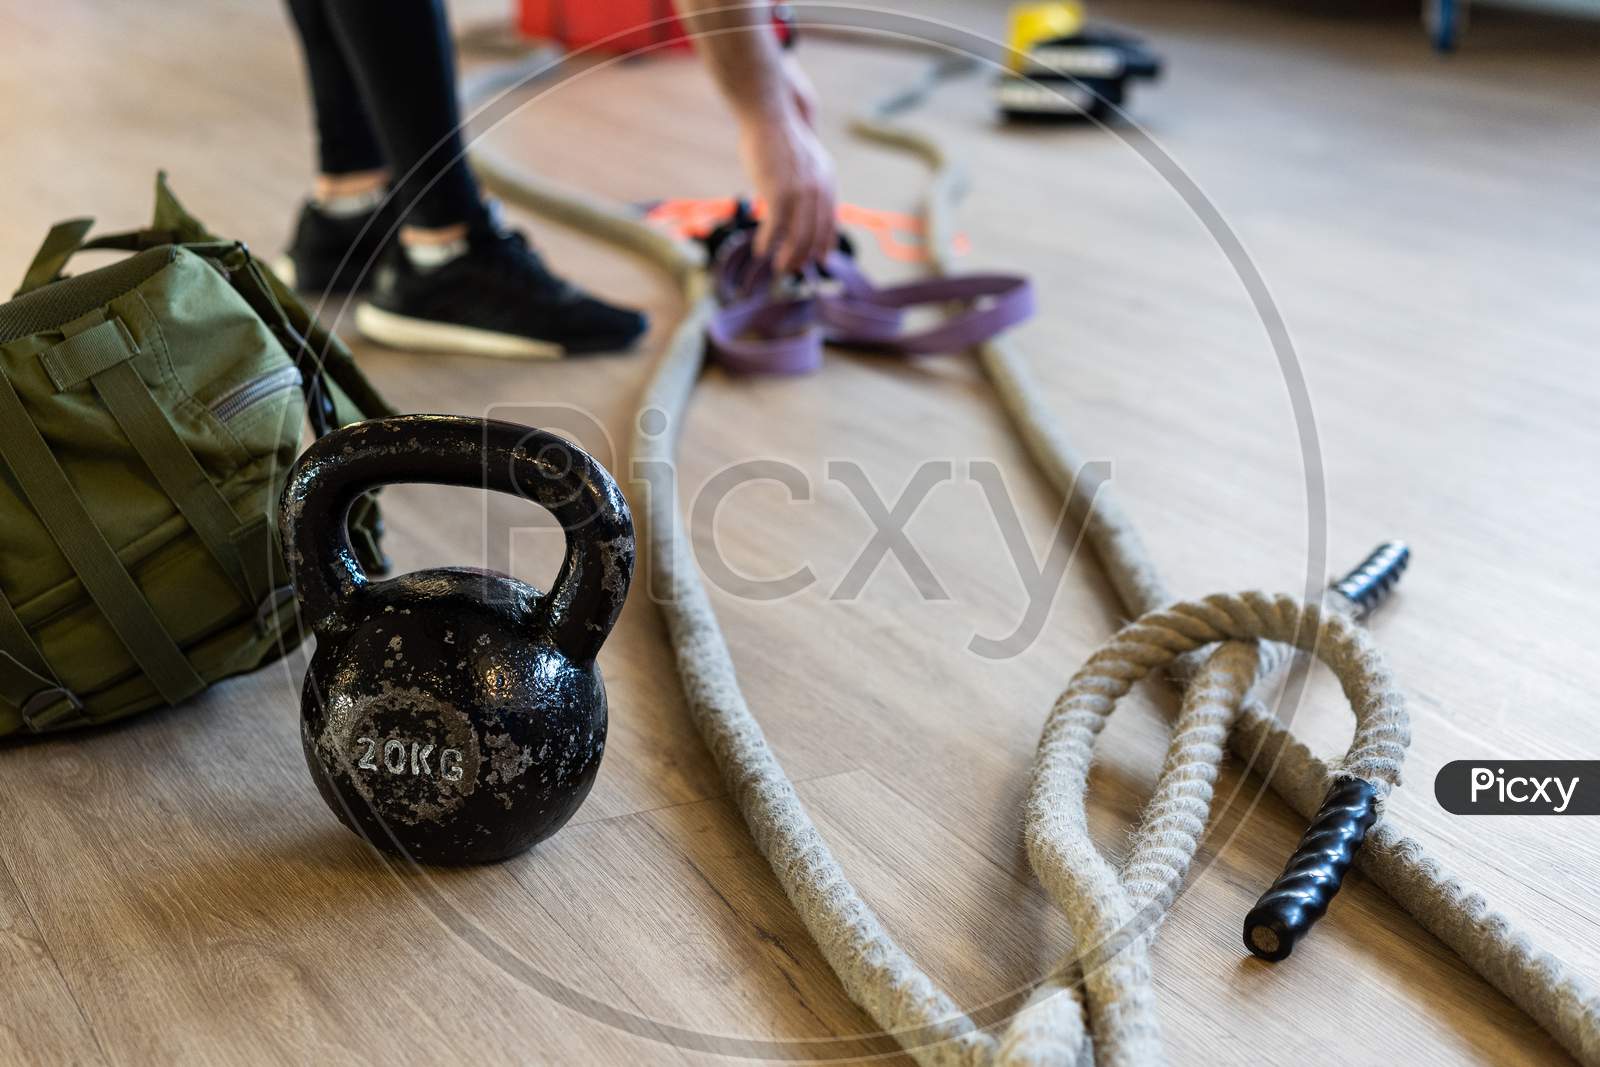 Preparing Gym Equipment For Boot Camp And Work Out. Kettle Bell, Rope, Sandbag In Gym Hall.